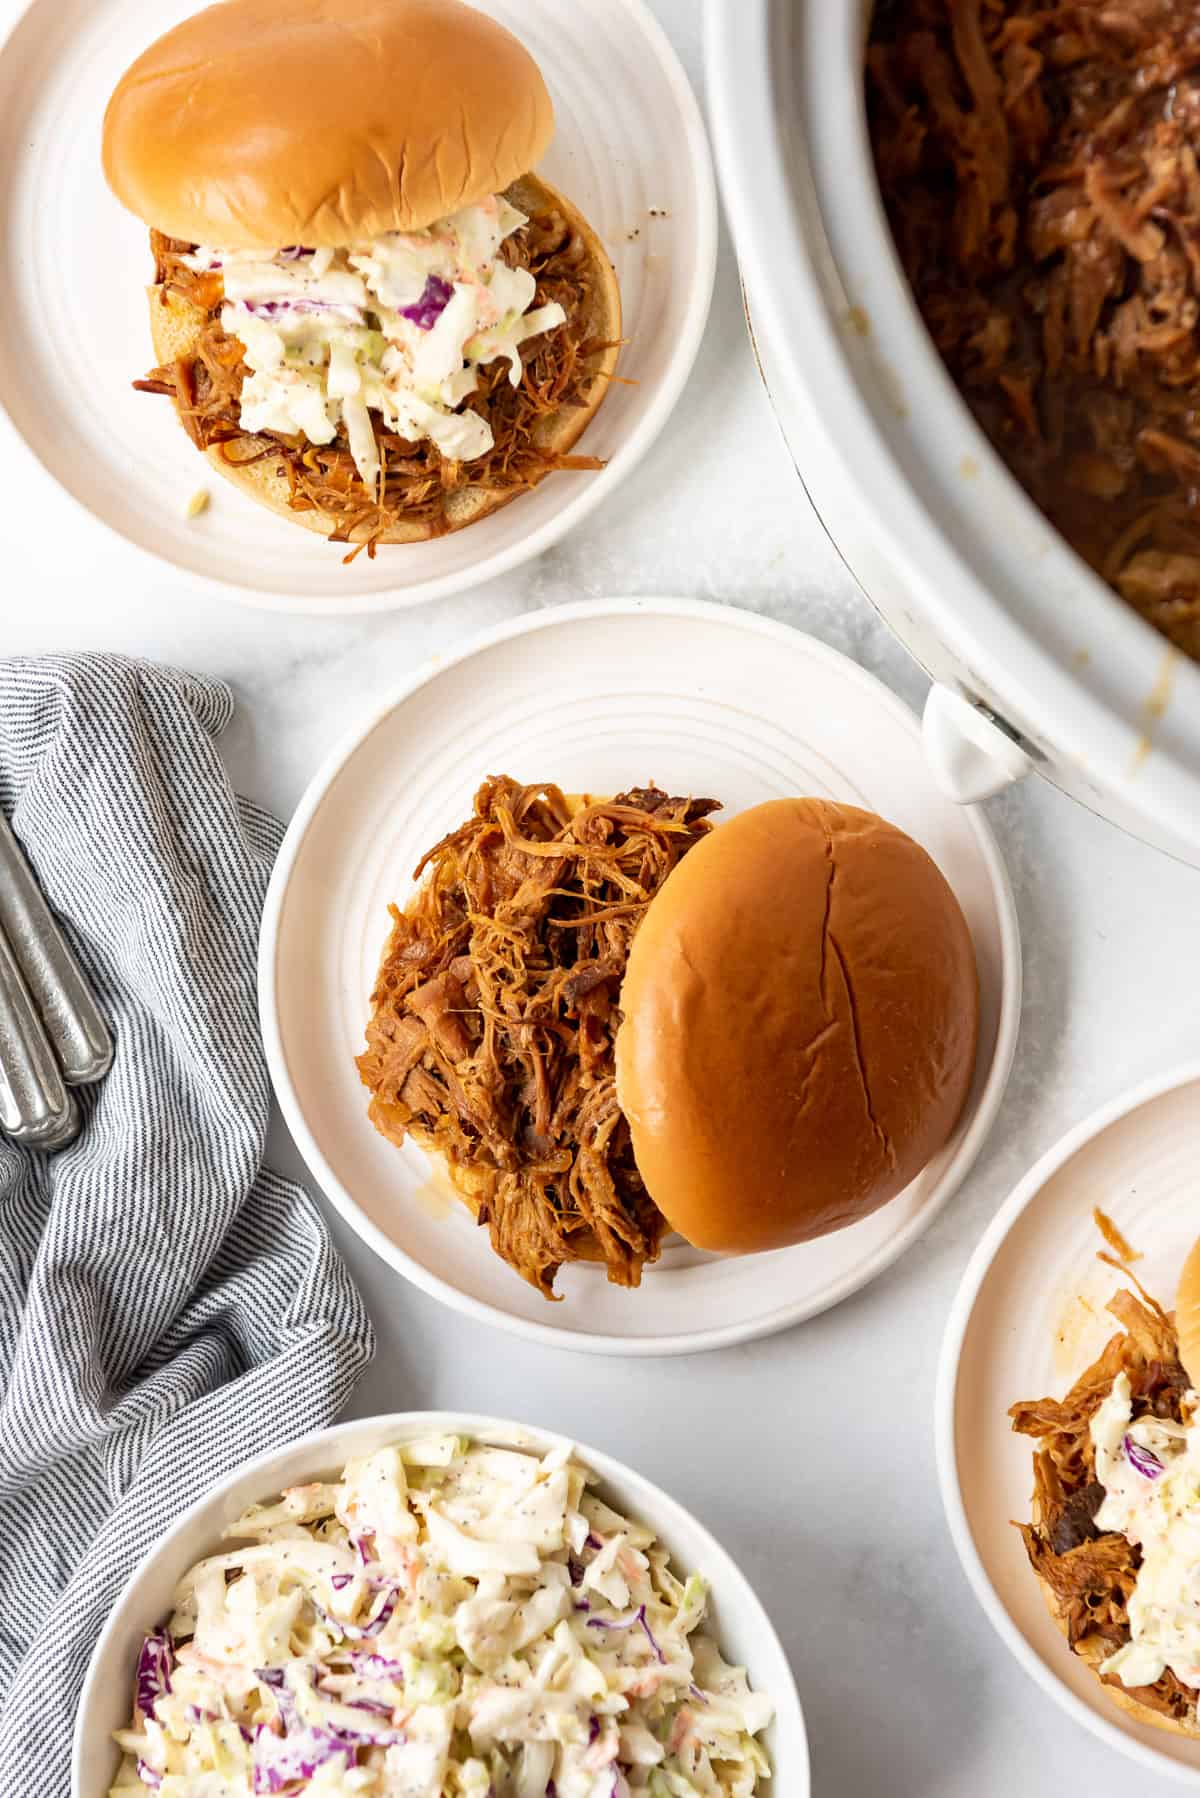 An overhead image of a buns topping pulled pork sandwiches on white plates.